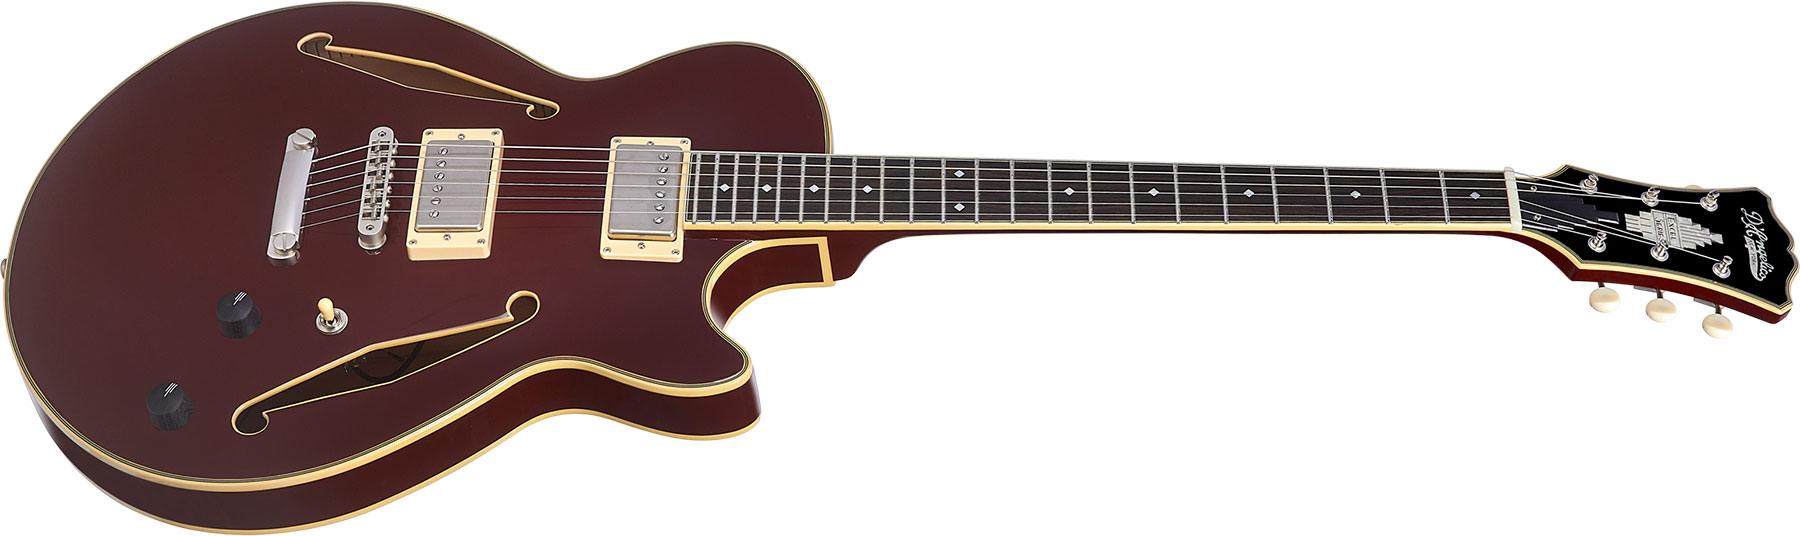 D'angelico Ss Tour Excel 2h Ht Eb - Solid Wine - Semi-Hollow E-Gitarre - Variation 1